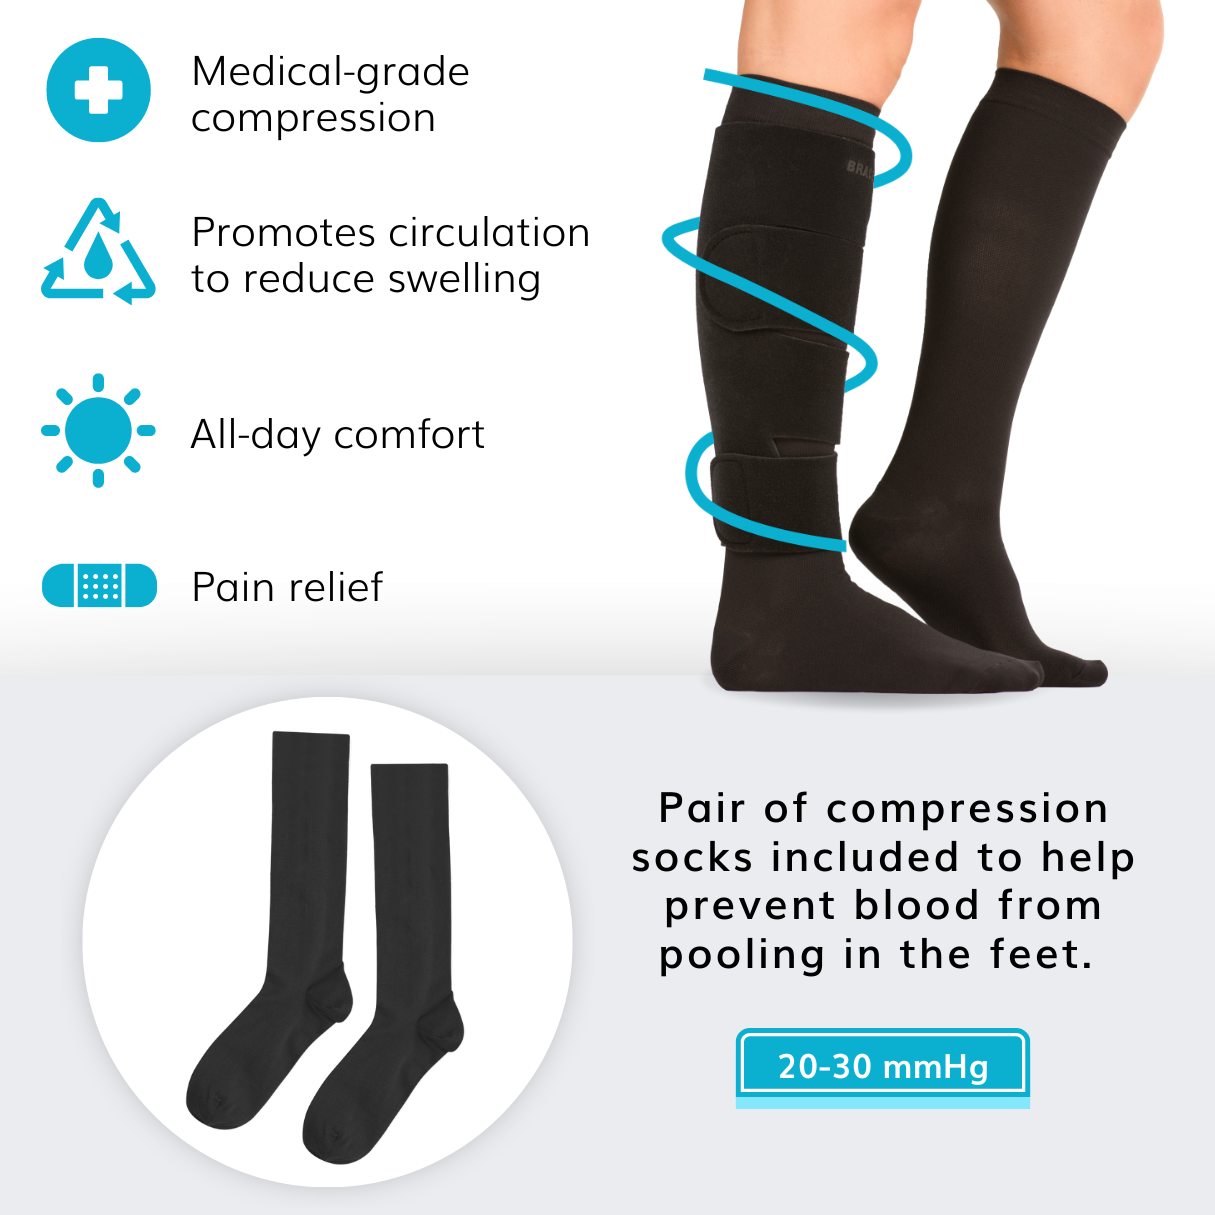 The lymphedema wrap comes with a pair of compression stockings with 20 to 30 mmhg